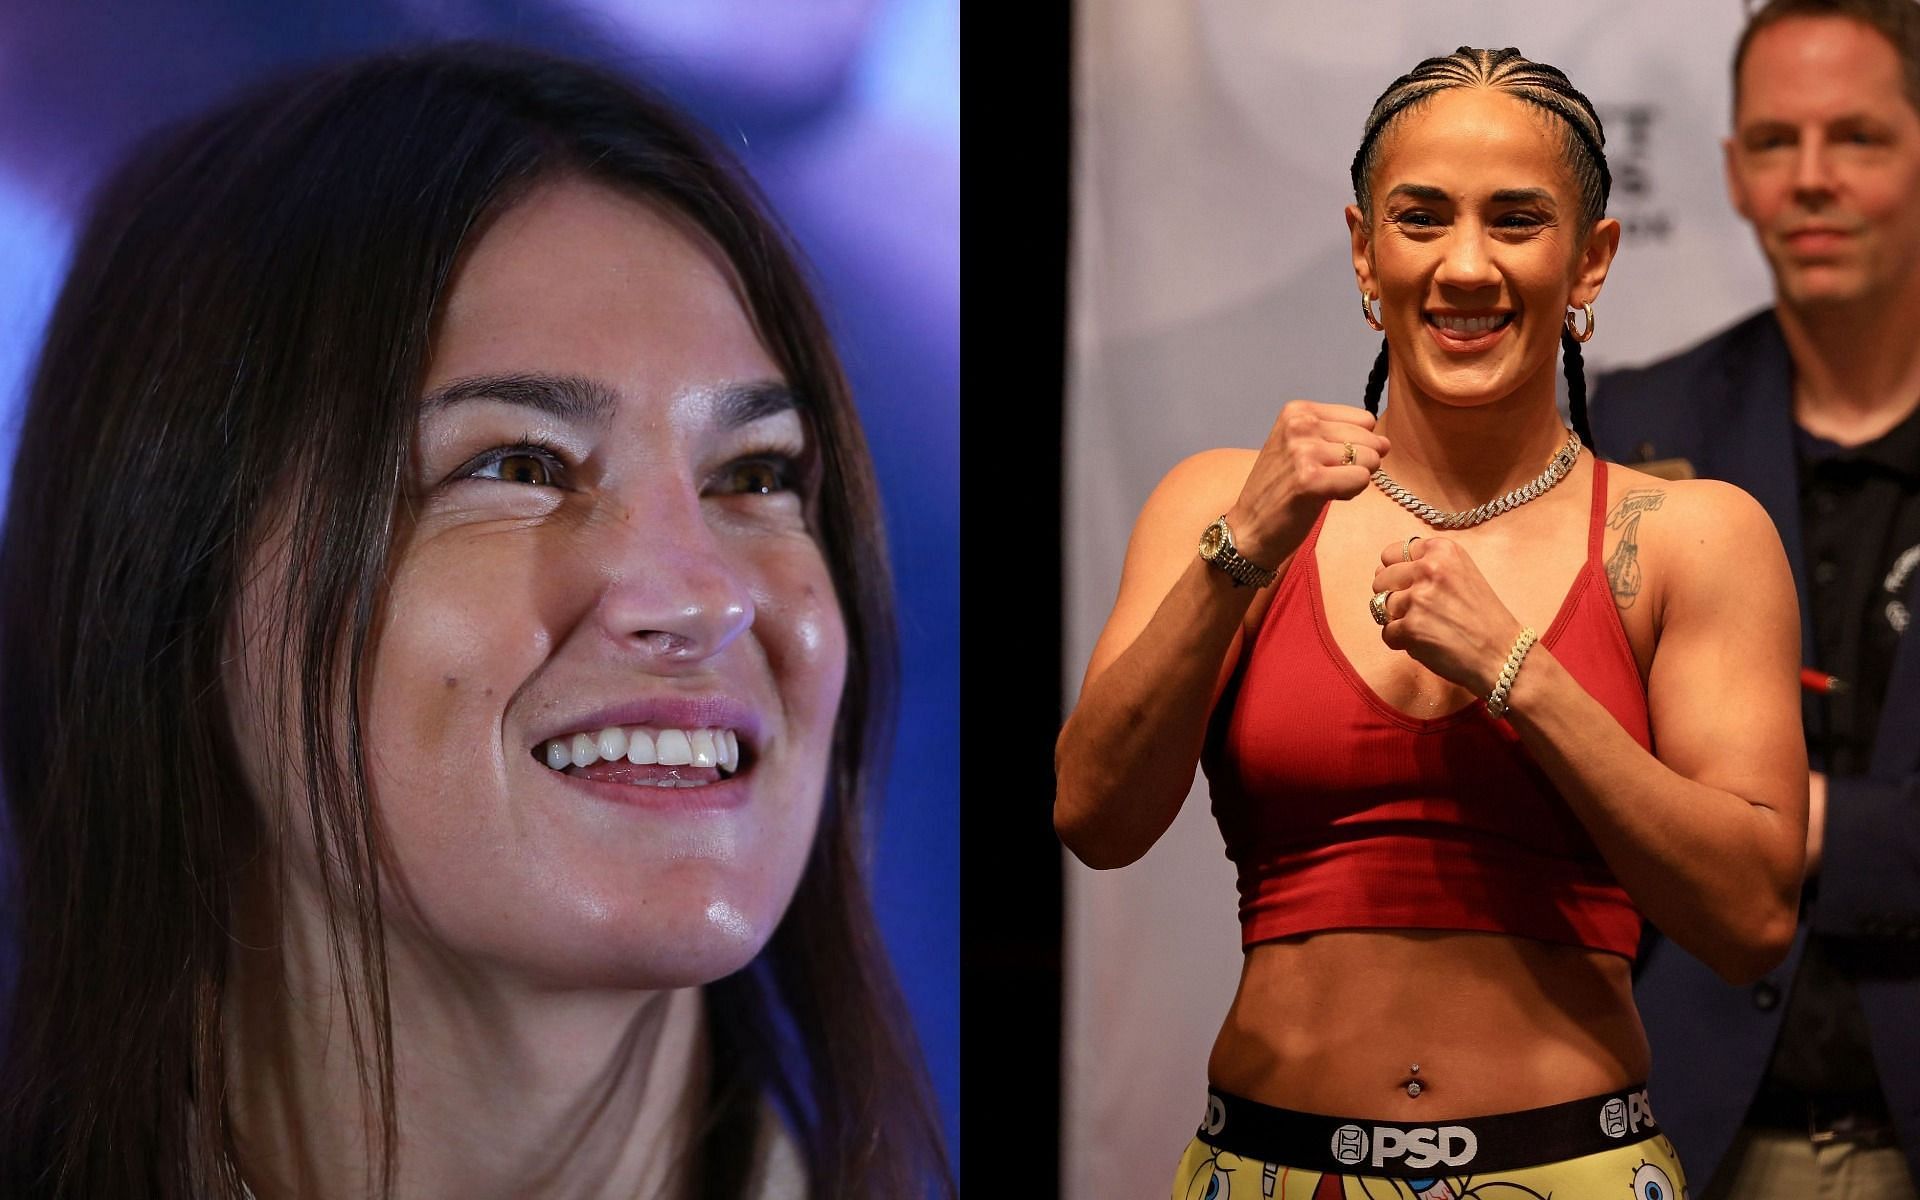 Katie Taylor (L) has weighed in on her upcoming bout against Amanda Serrano (R)